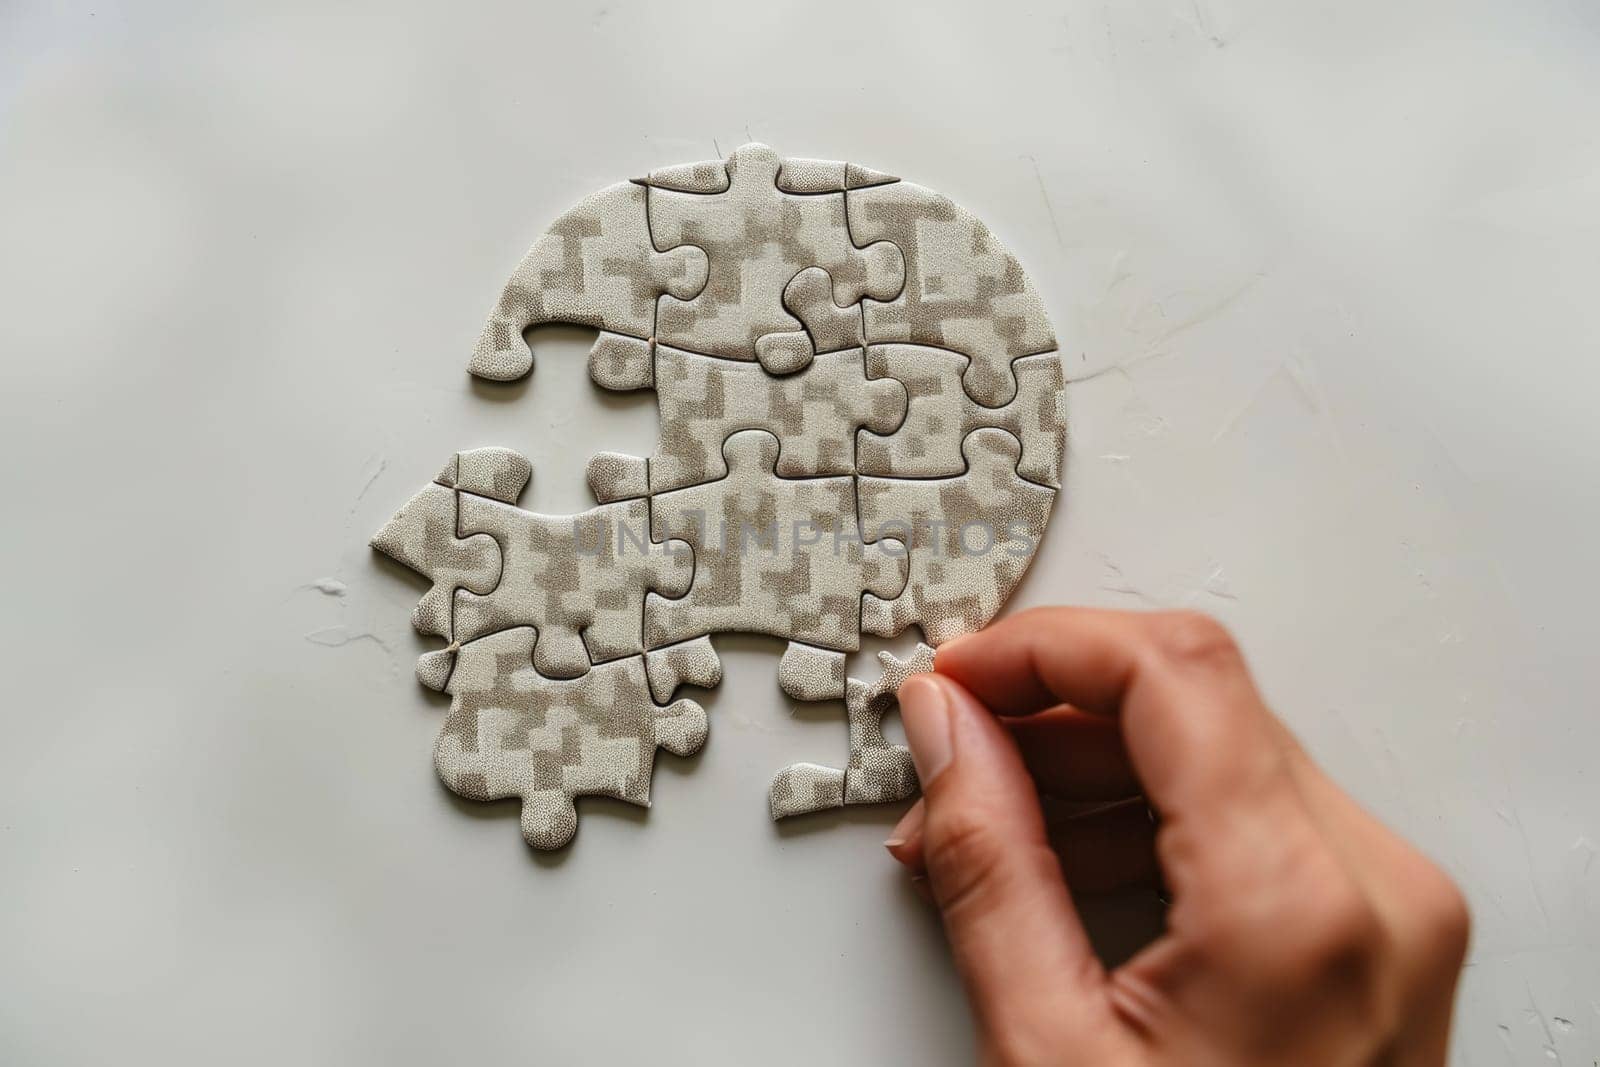 A person's hand fitting a piece into a textured jigsaw puzzle with a houndstooth pattern, symbolizing attention to detail